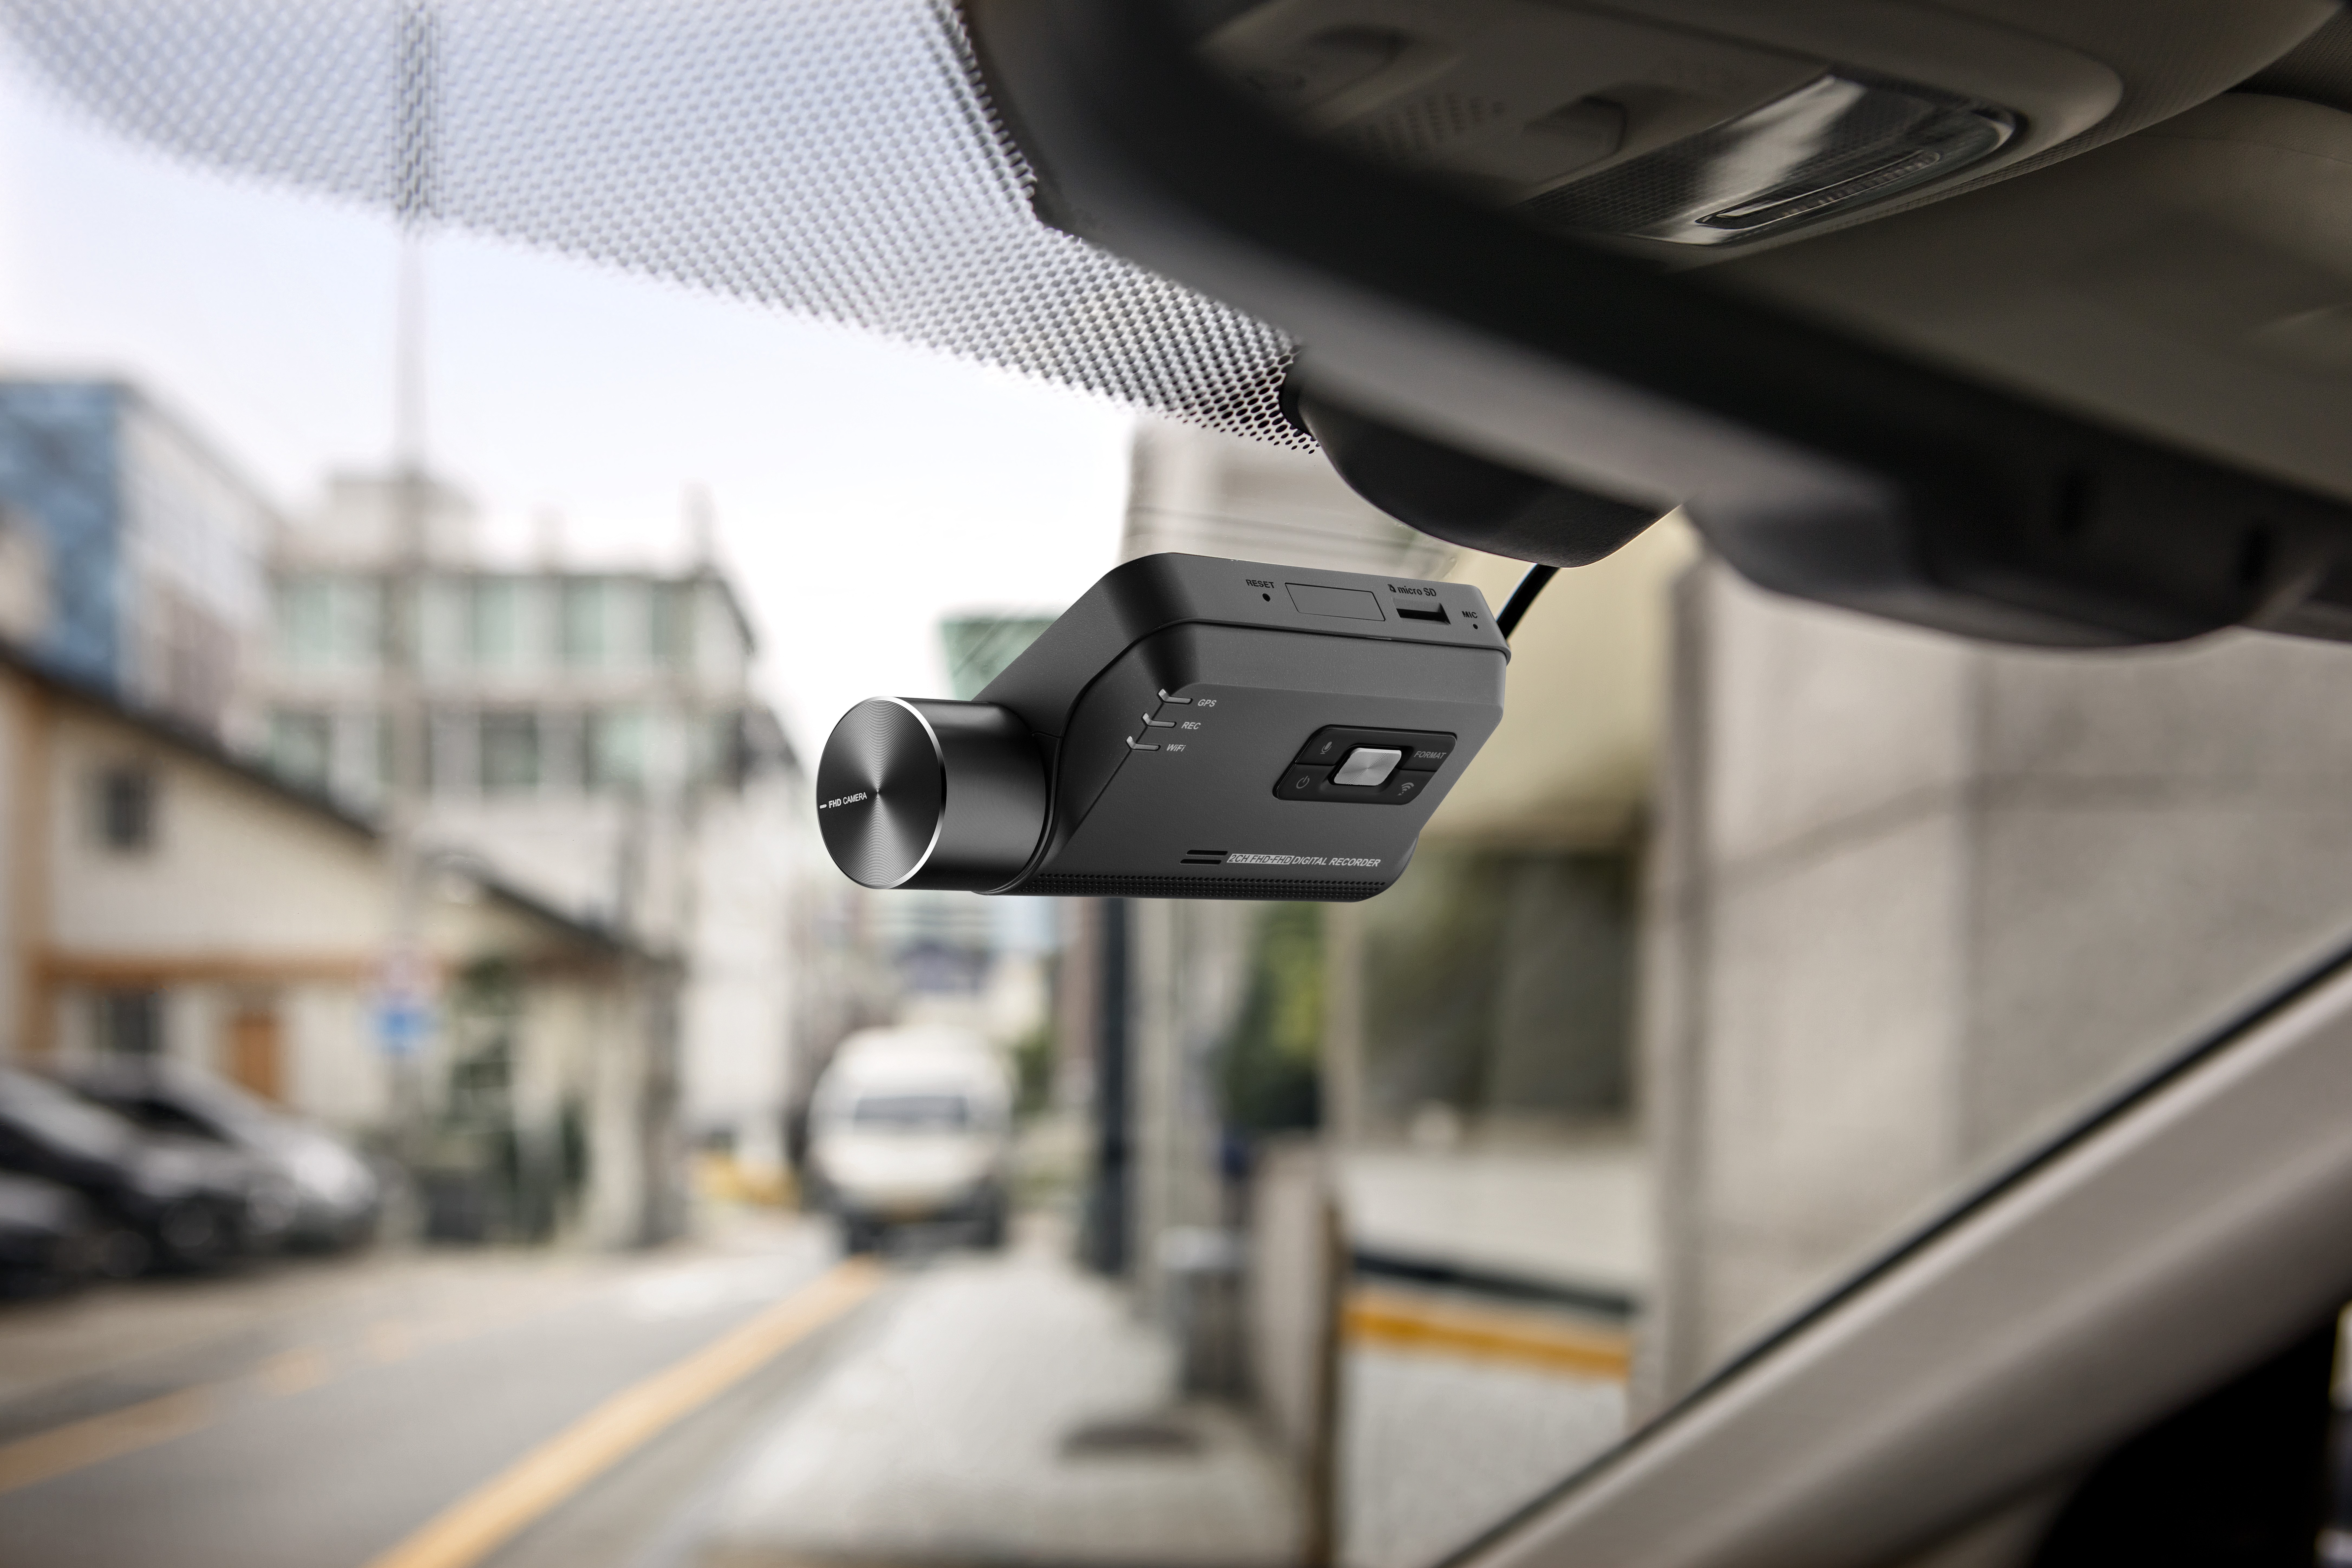 Full HD Front Dash Cam with ADAS, 32GB SD Card, IR Interior Facing Camera  and OBD II T-Harness. - EchoMaster